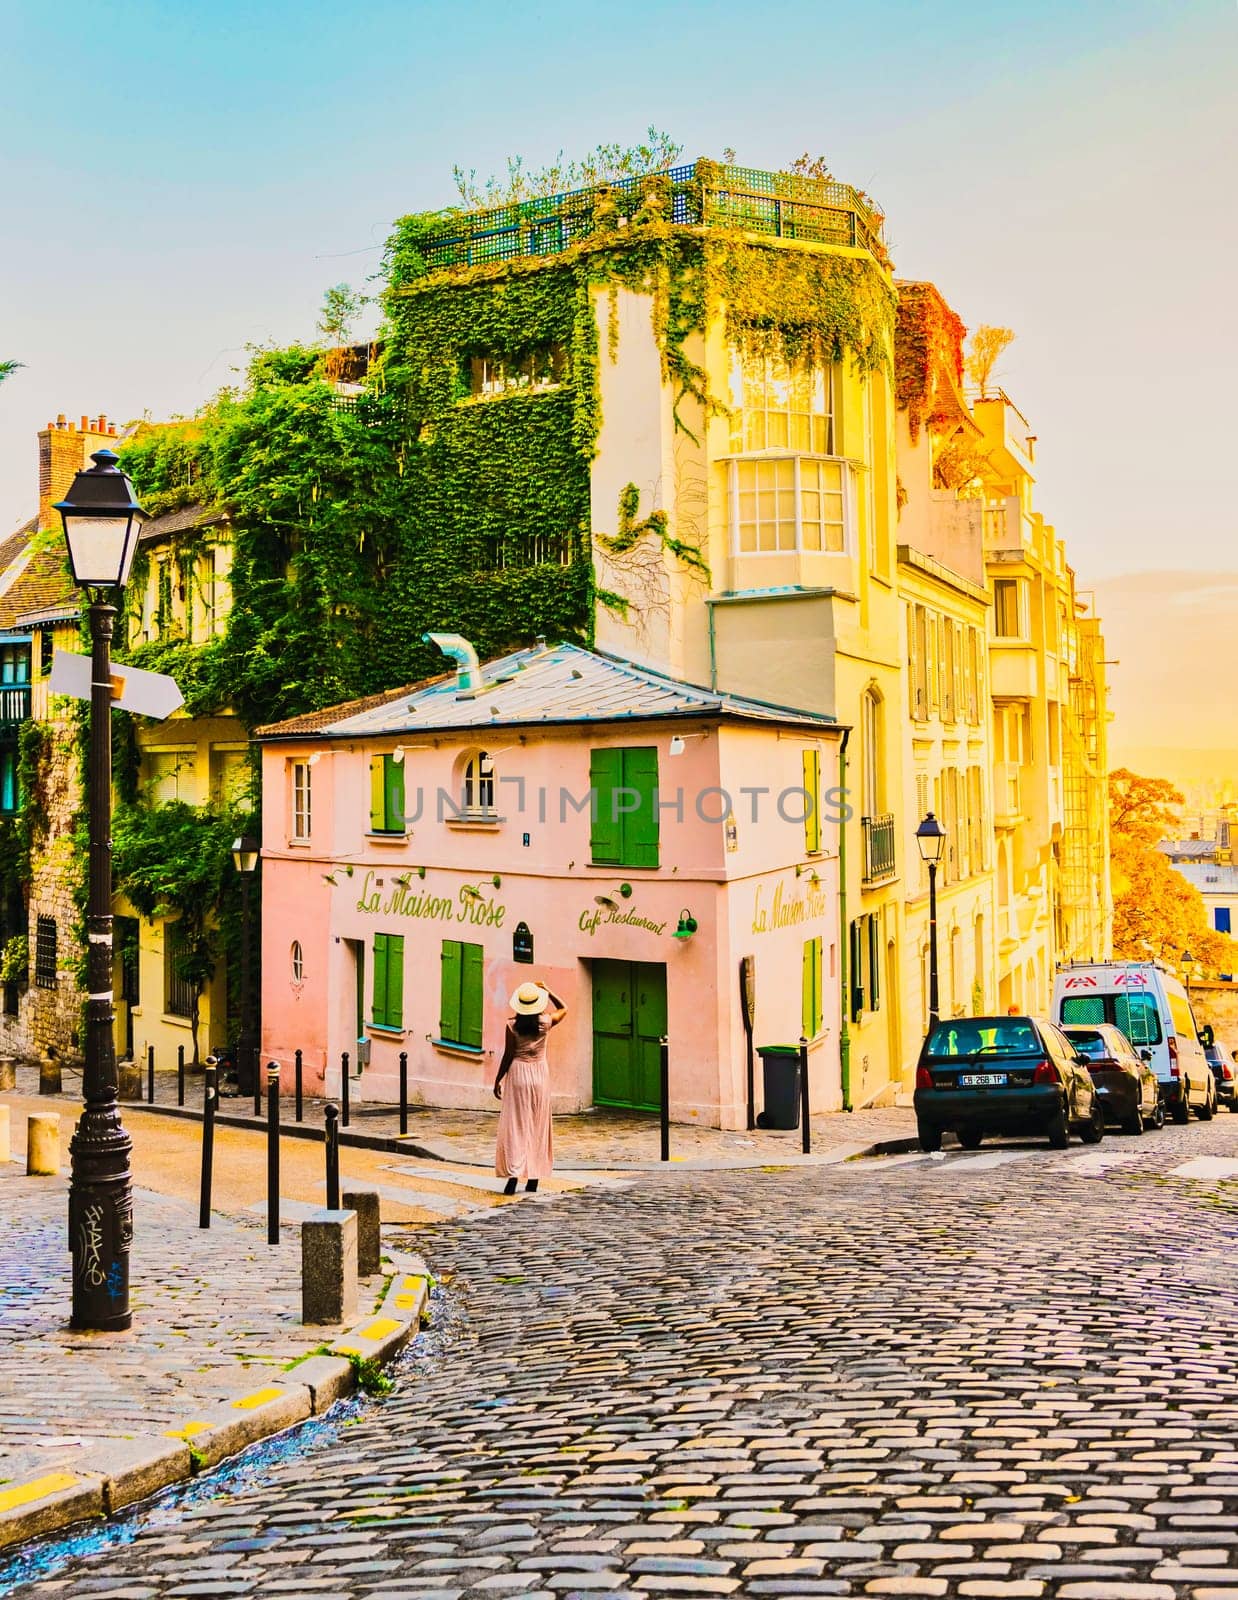 Paris France Streets of Montmartre in the early morning with cafes and restaurants by fokkebok